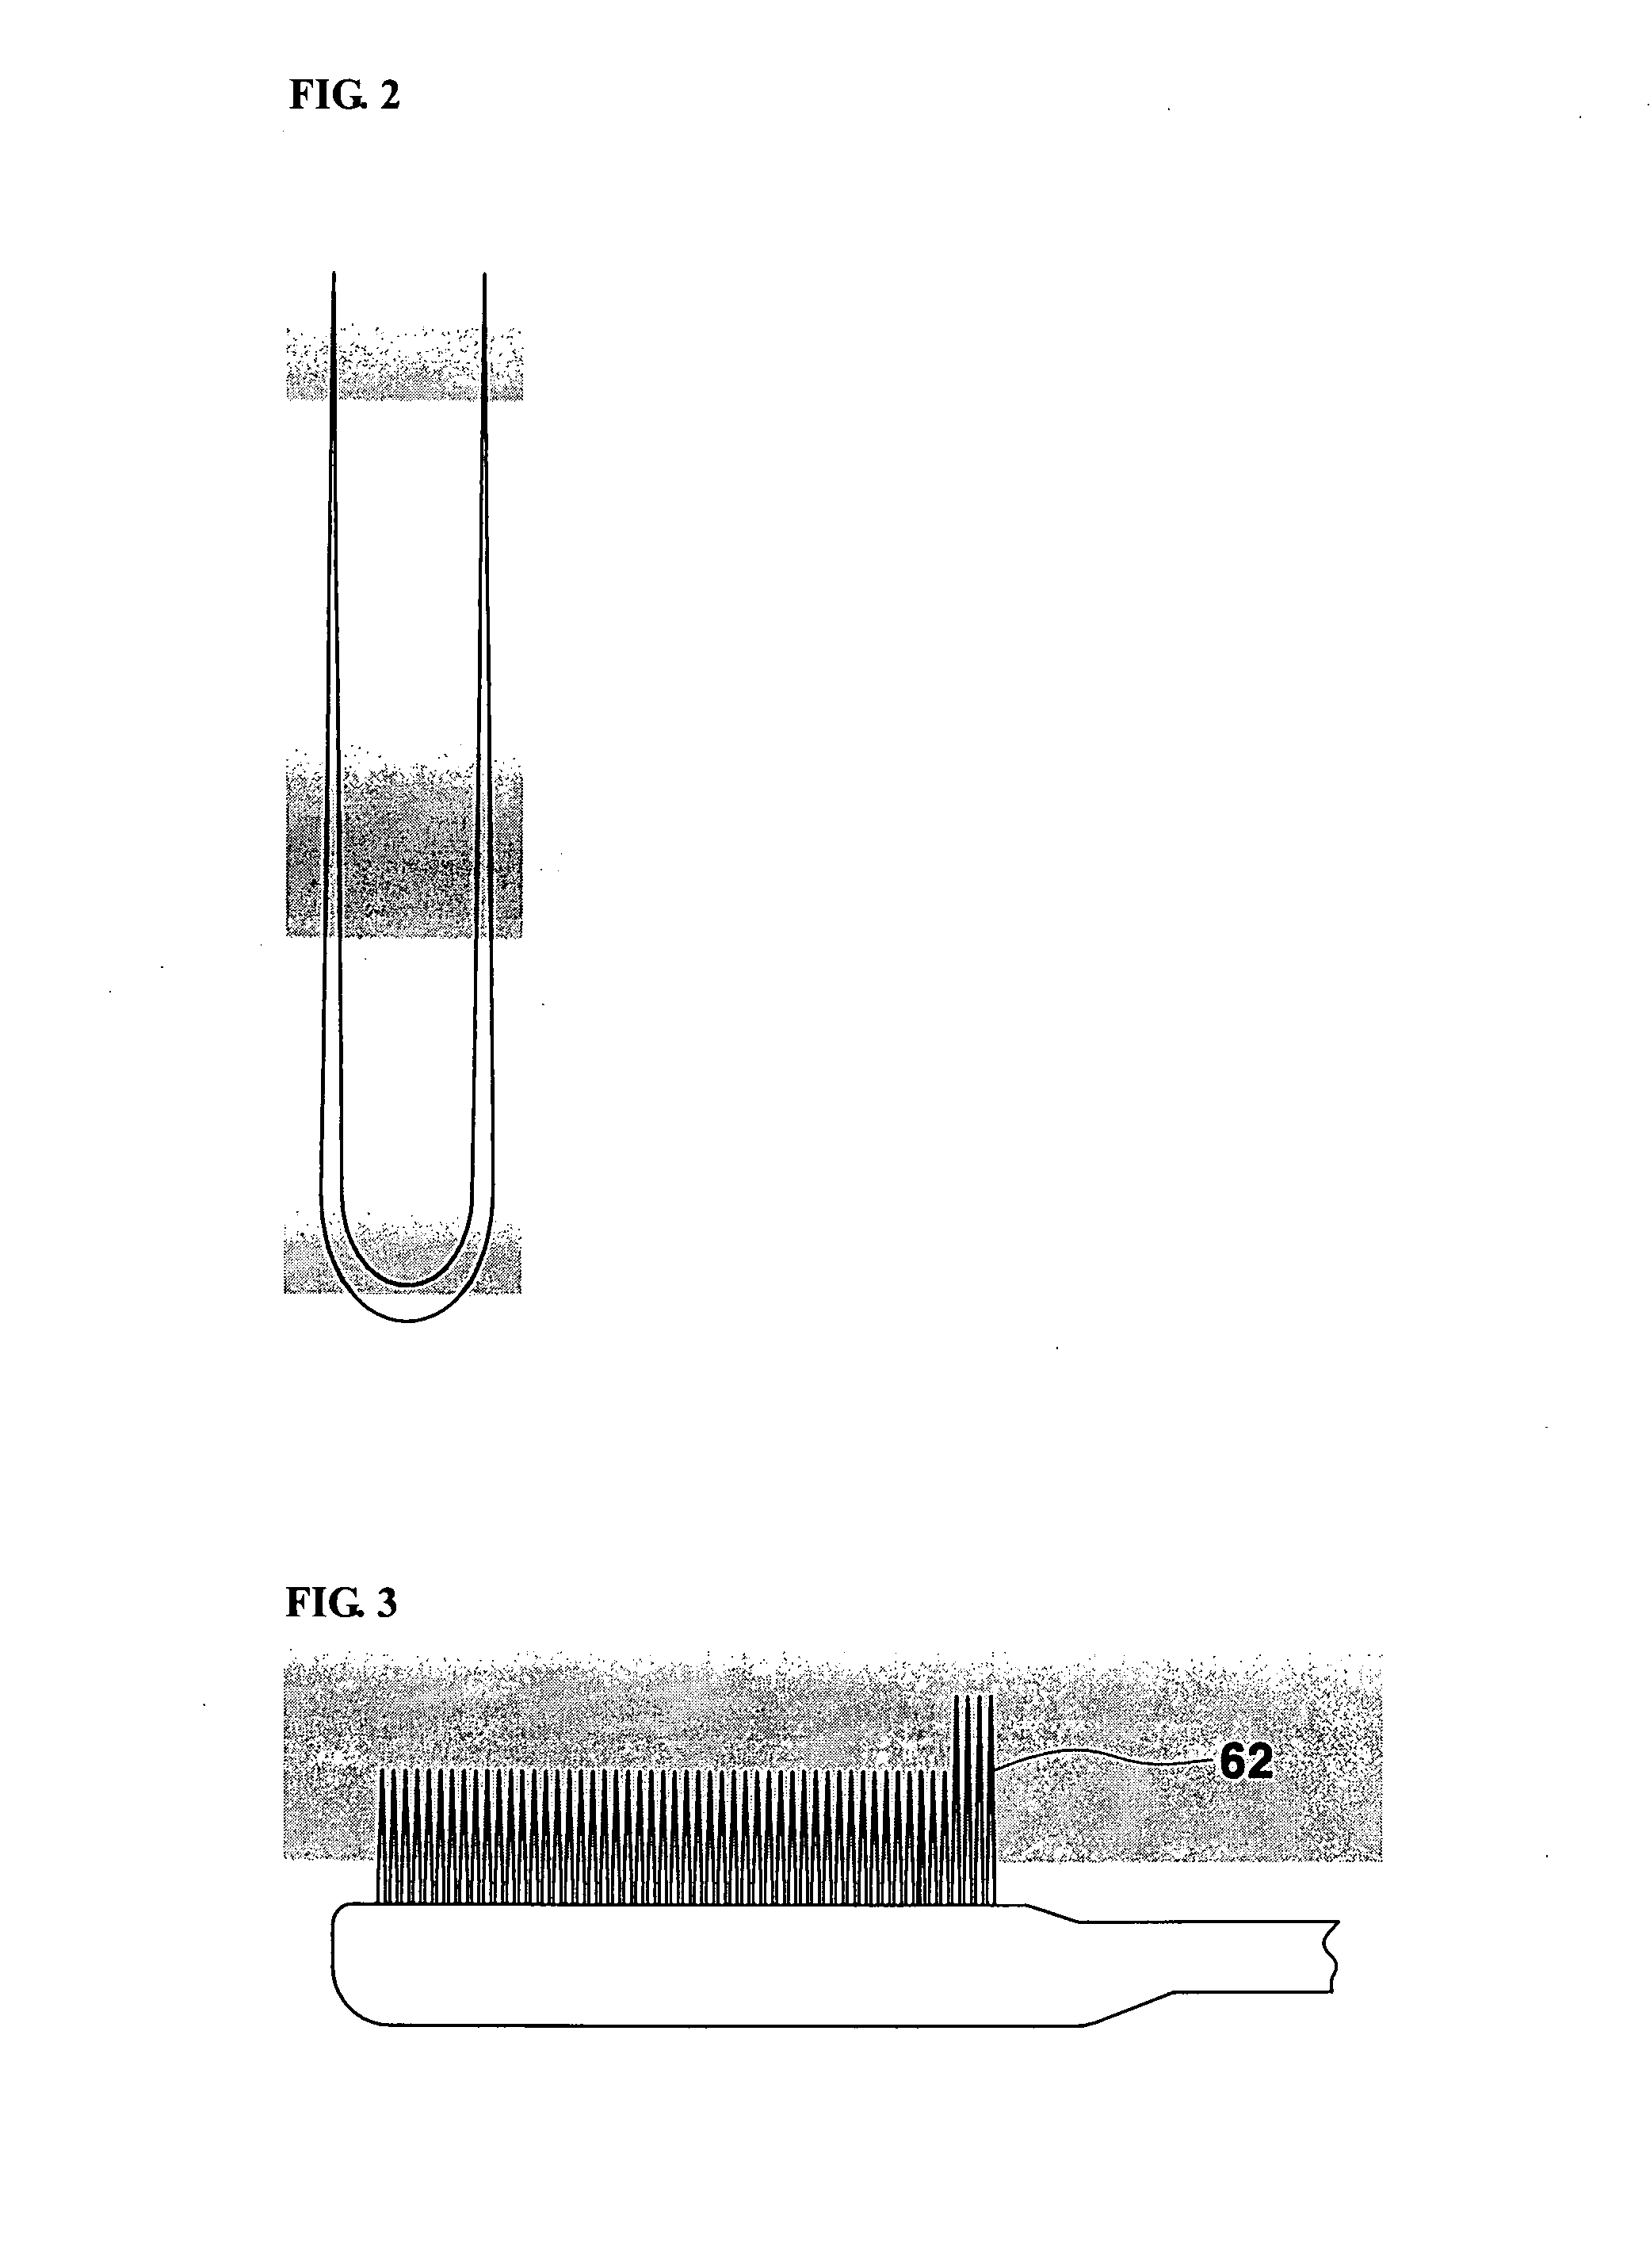 Toothbrush having needle-shaped bristle tapered at one end and manufacturing method thereof